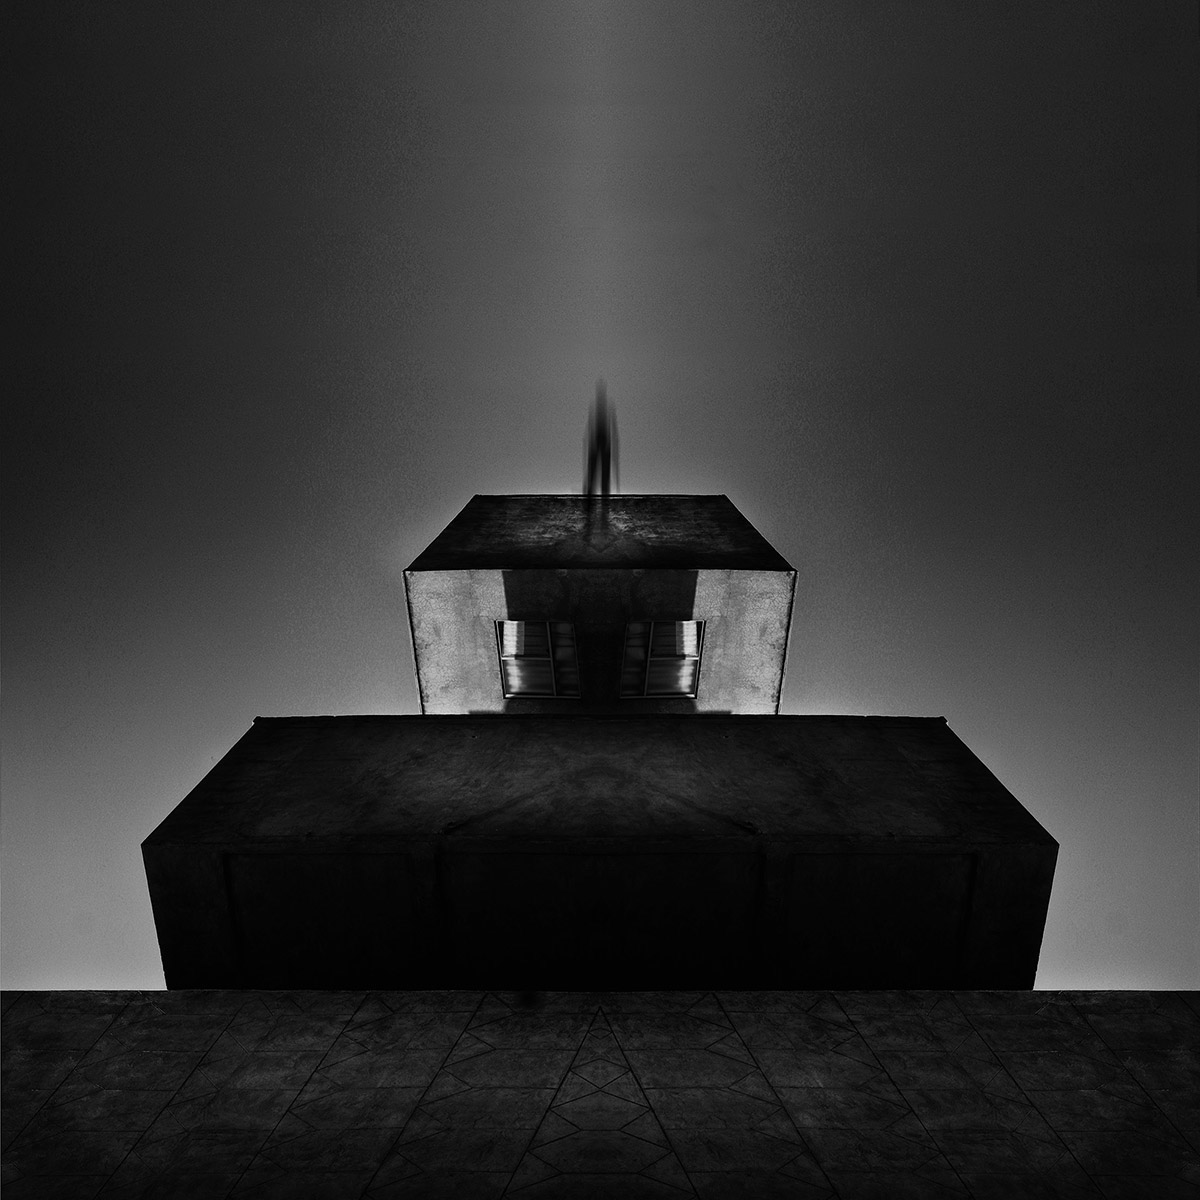 thespaceinbetween milad safabakhsh FINEART Minimalism creative holography science